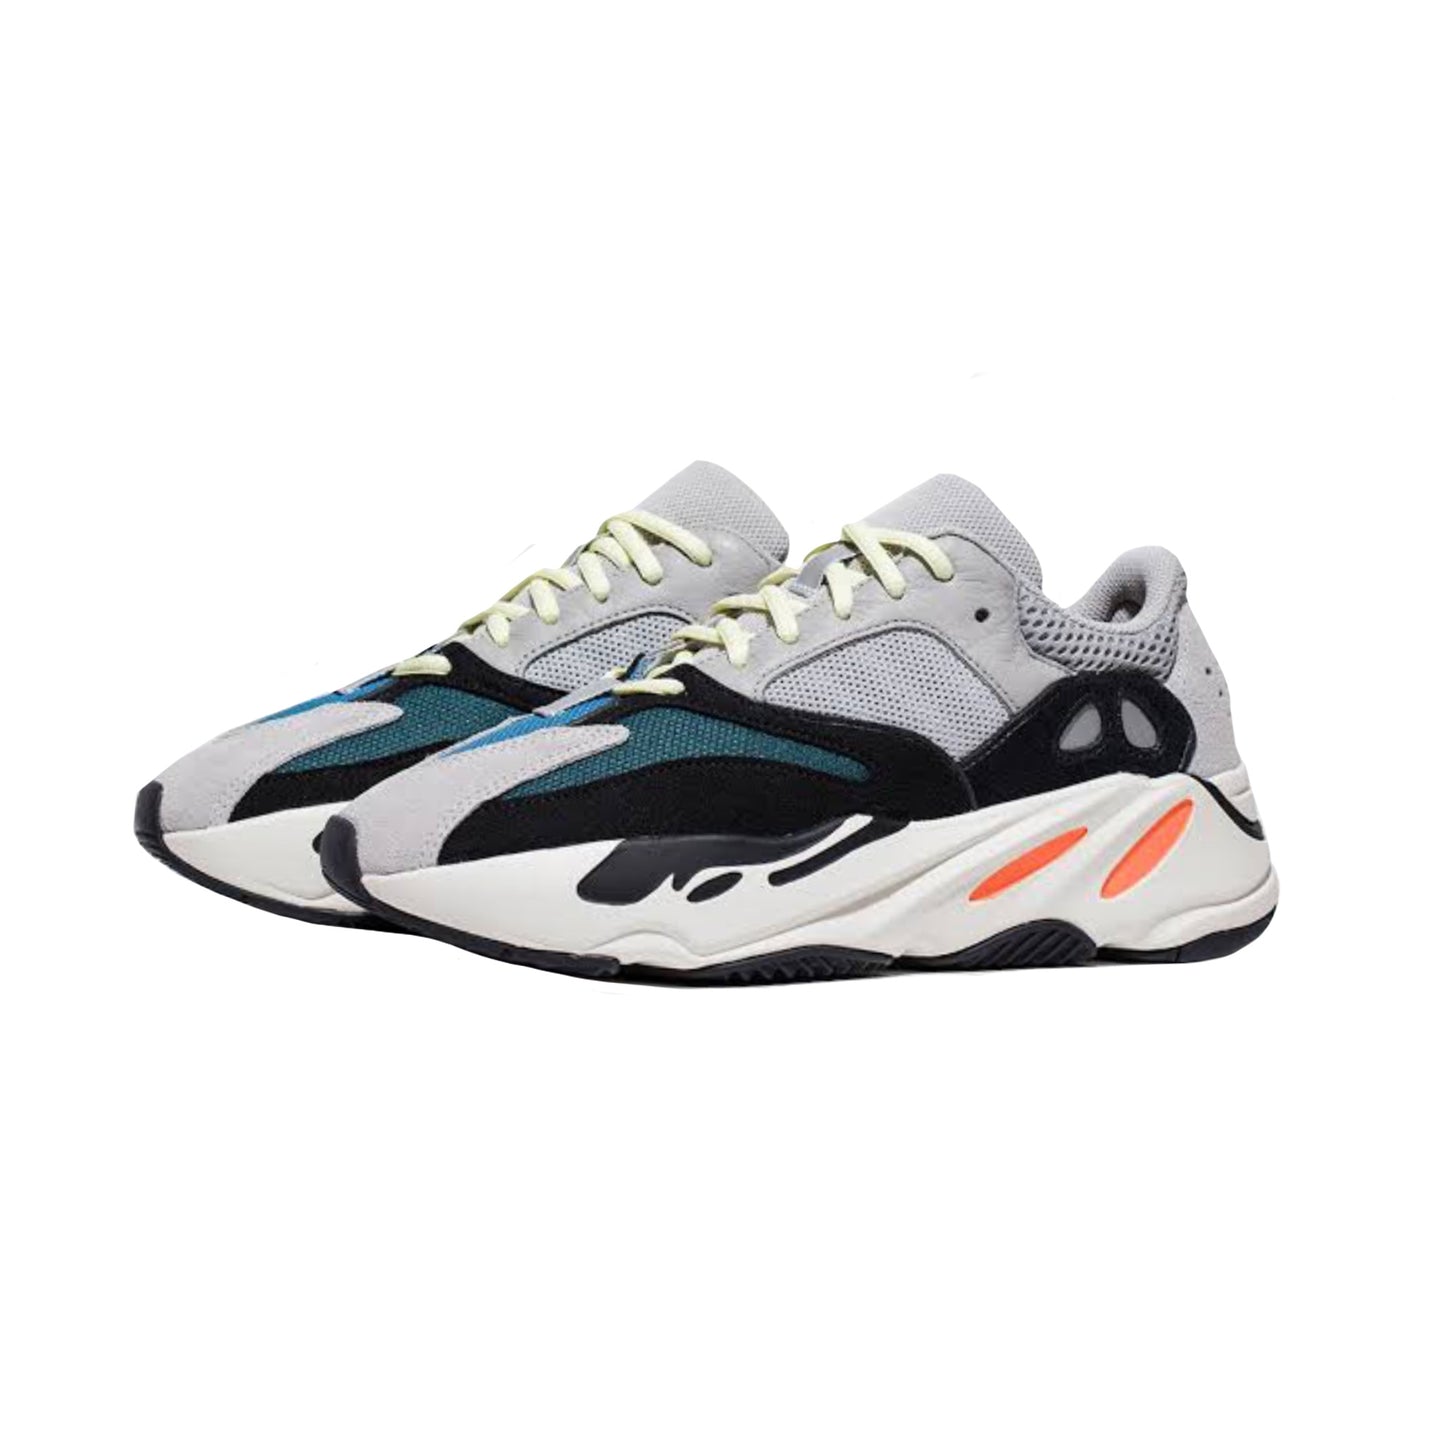 Yeezy Wave Runner 700 "Solid Grey" Solid Grey Chalk White Core Black